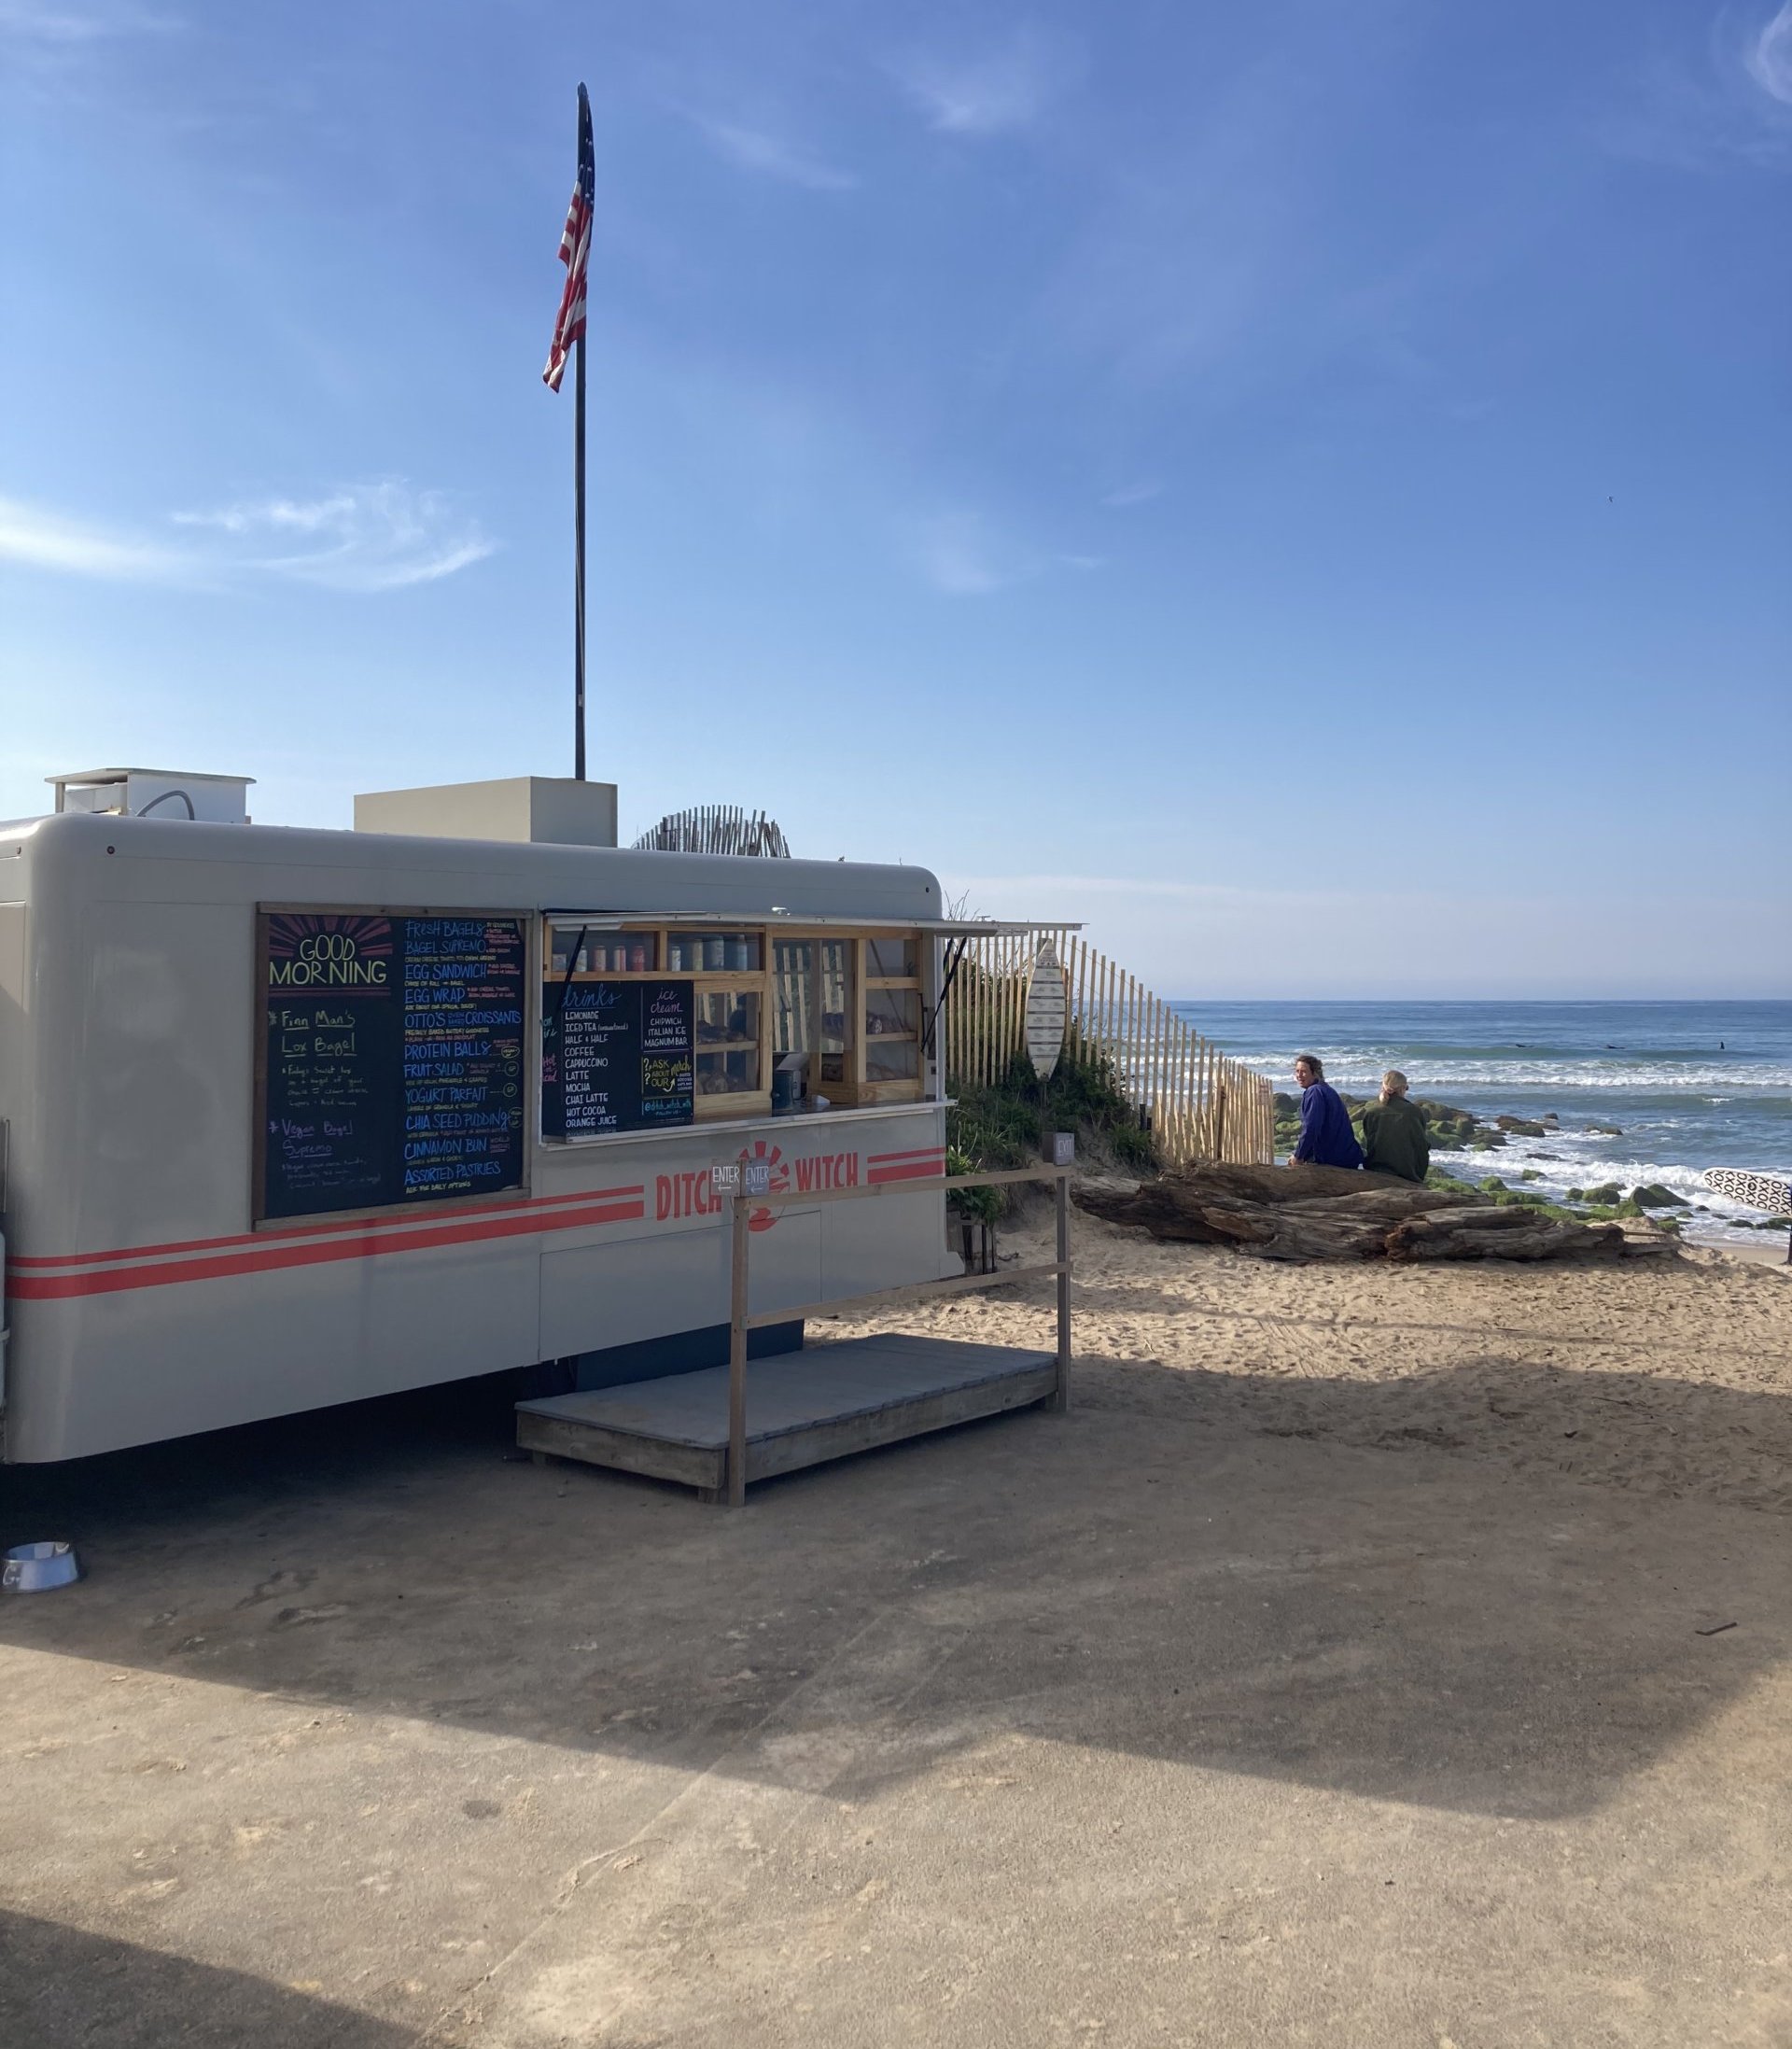 Ditch Witch food truck in Montauk is a Hamptons hidden dining gem